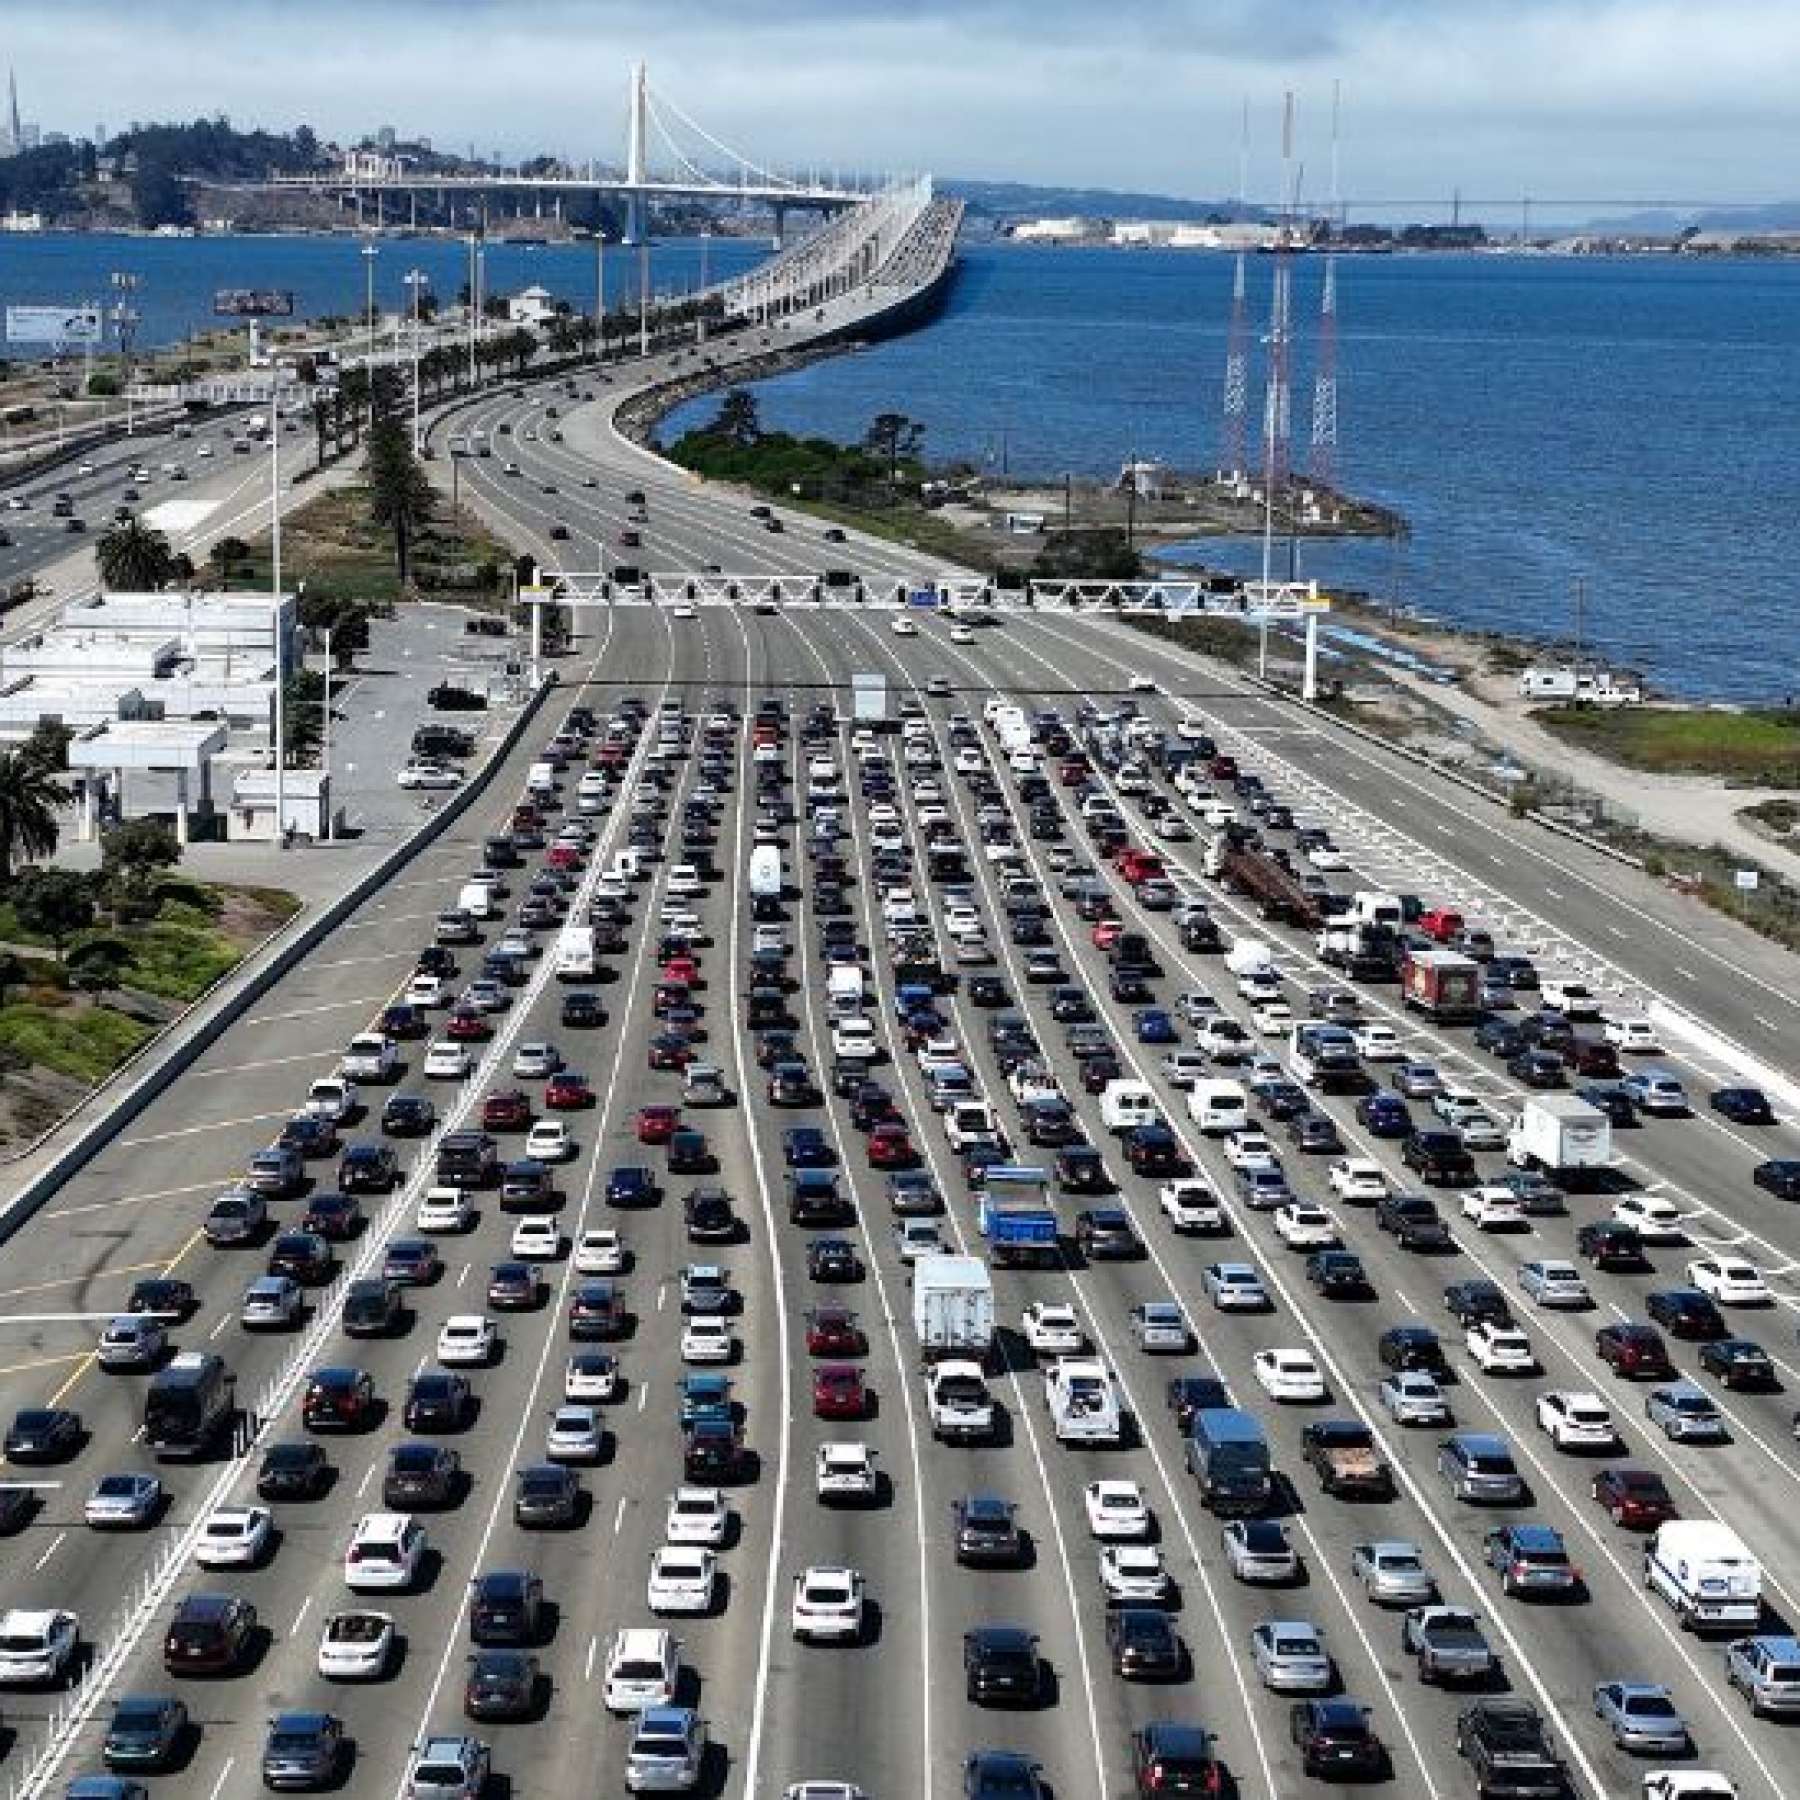 California regulators vote to ban the sale of new gasoline-powered cars by 2035